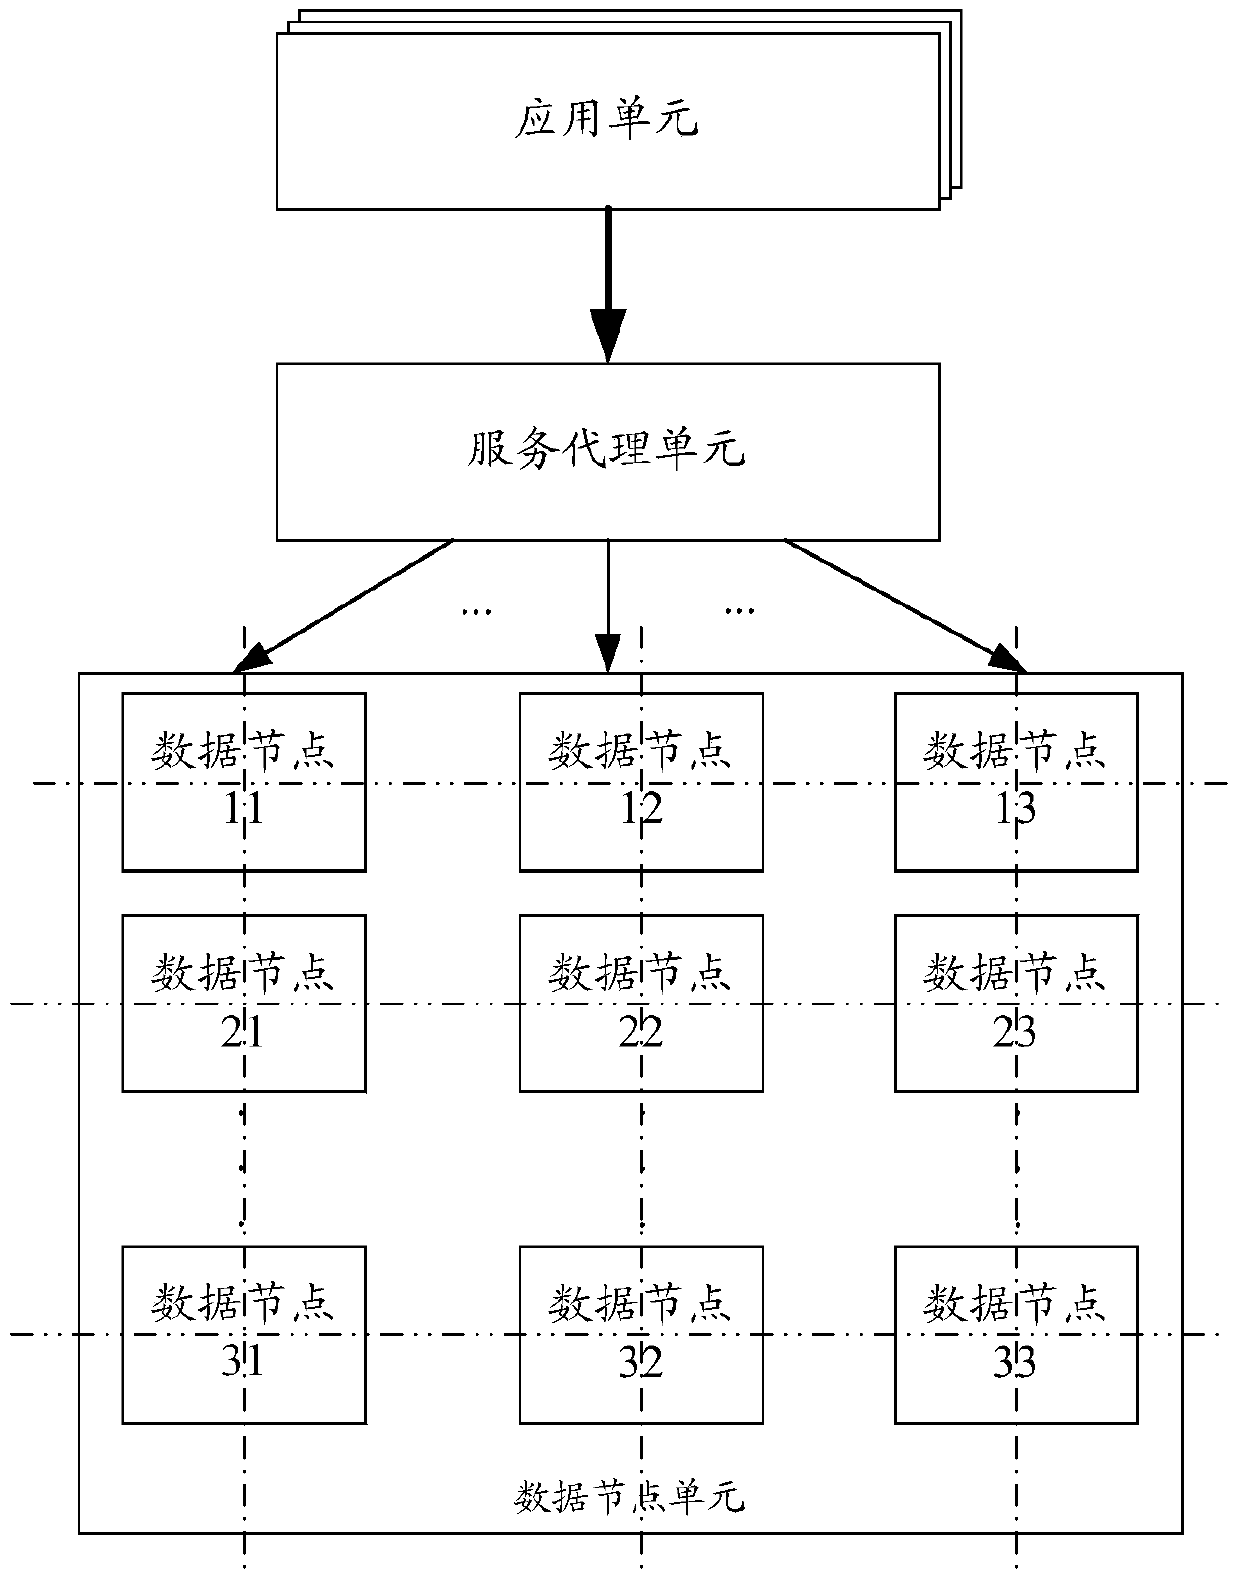 A distributed data processing method and system